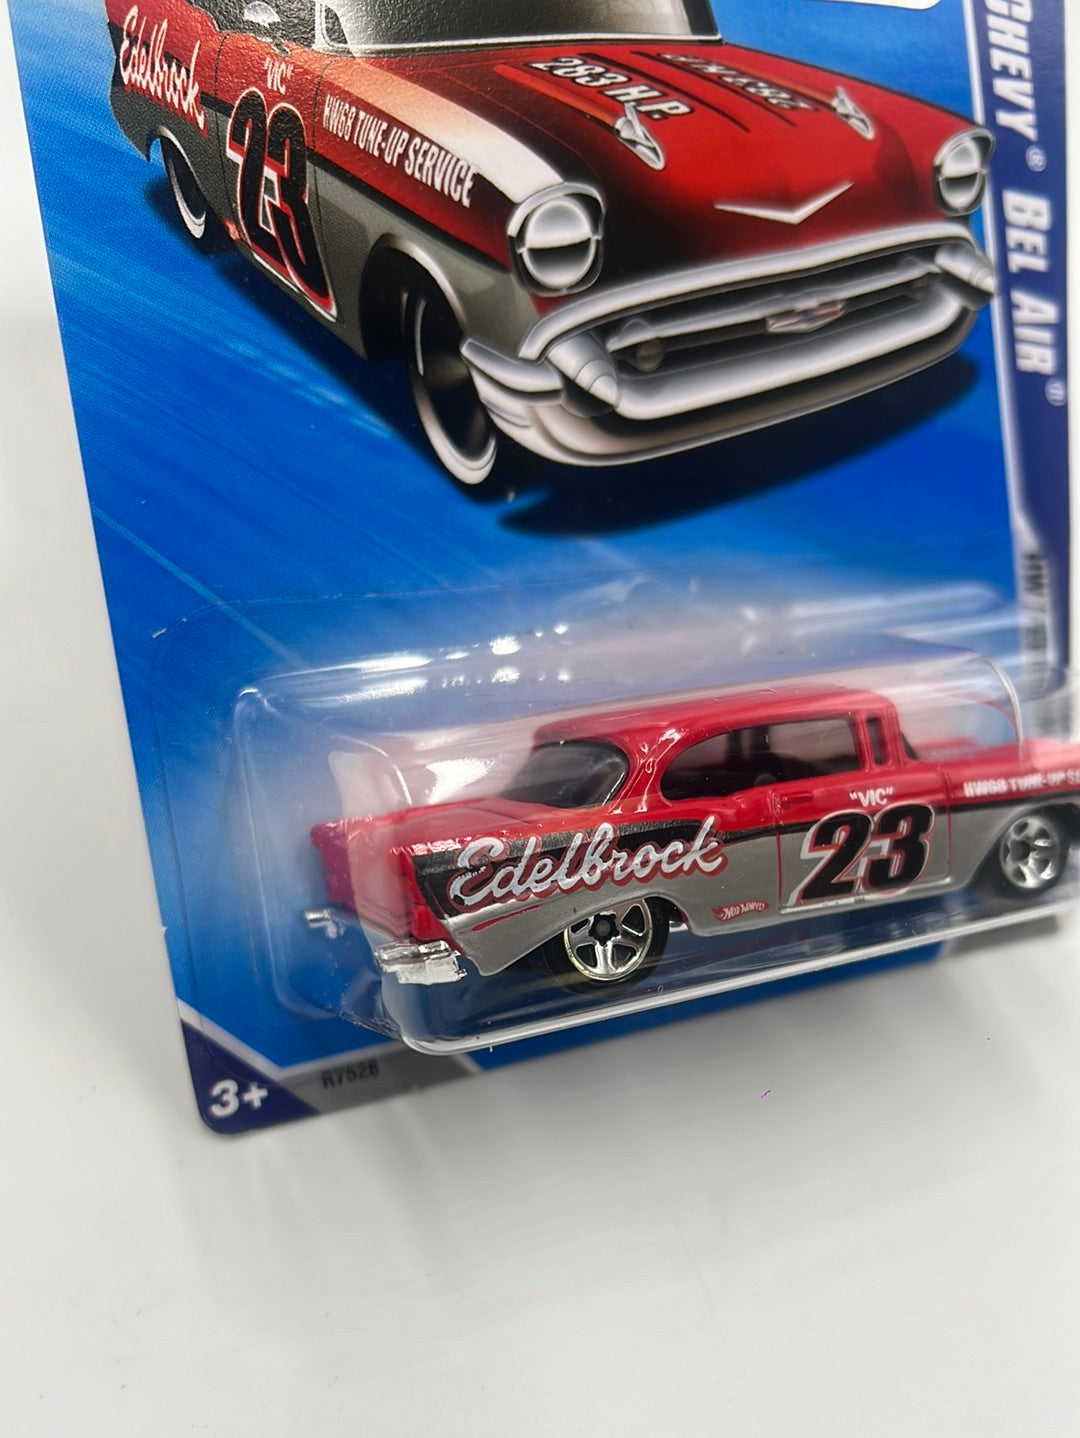 2010 Hot Wheels Performance Factory Sealed ‘57 Bel Air Kmart Exclusive Red 103/240